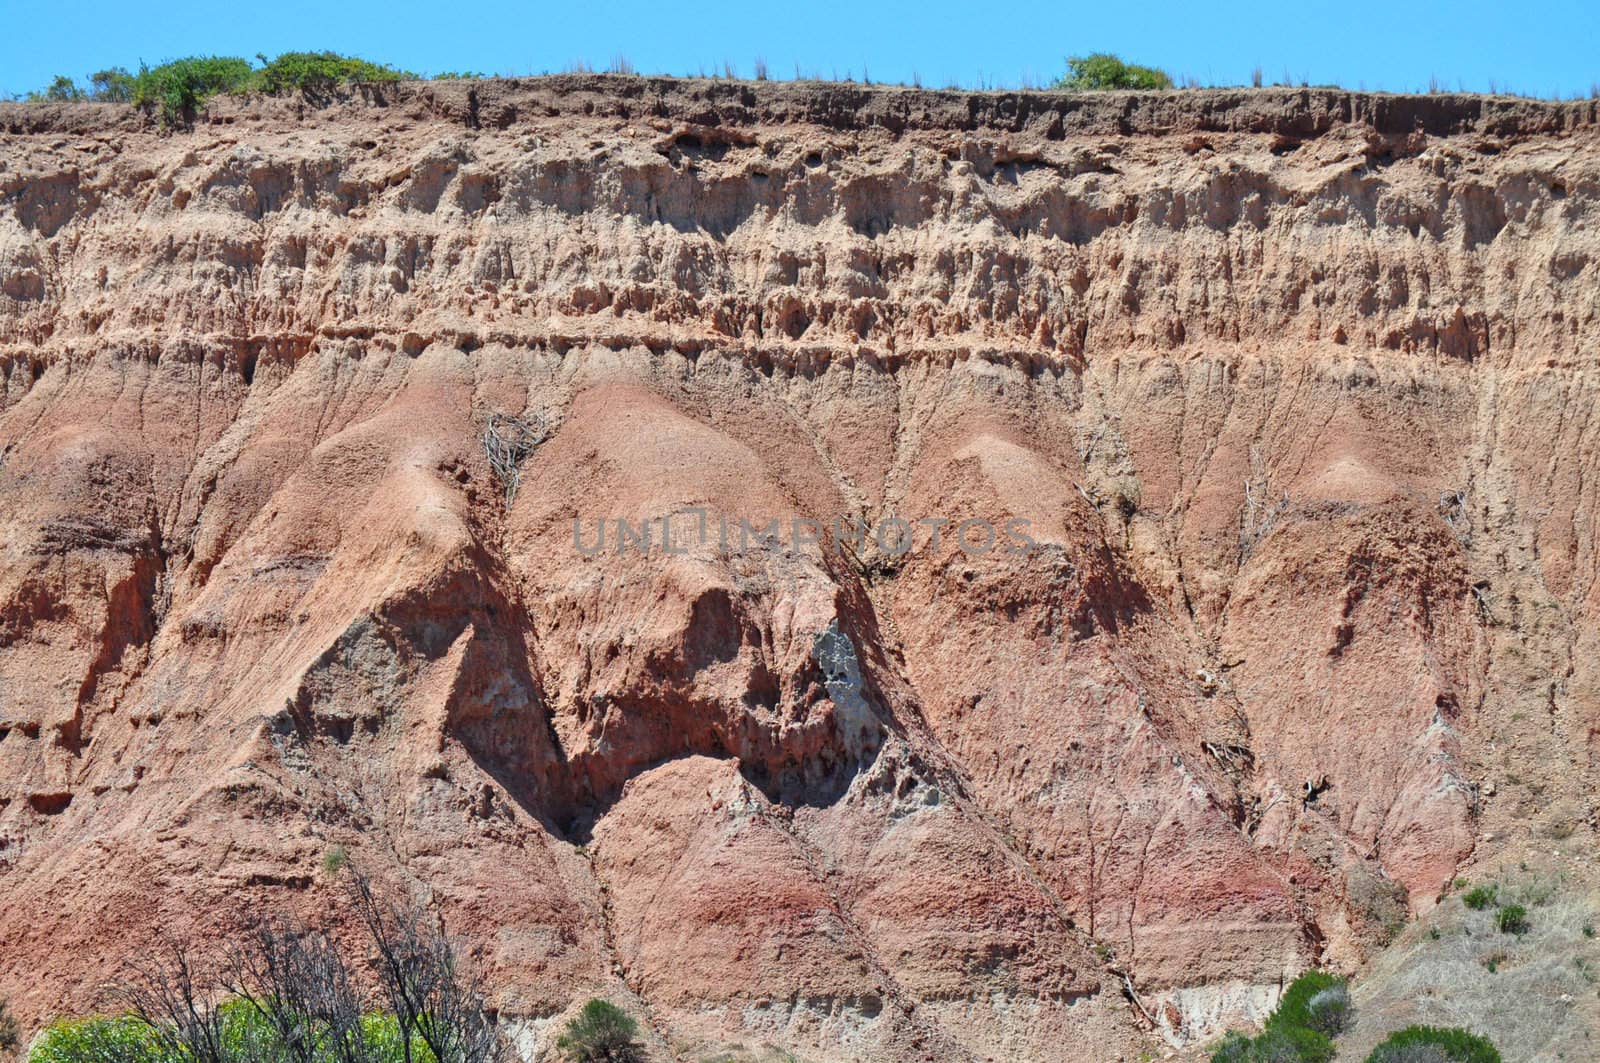 Rock formation in the Hallett Cove Conservation Park, South Australia. by dimkadimon